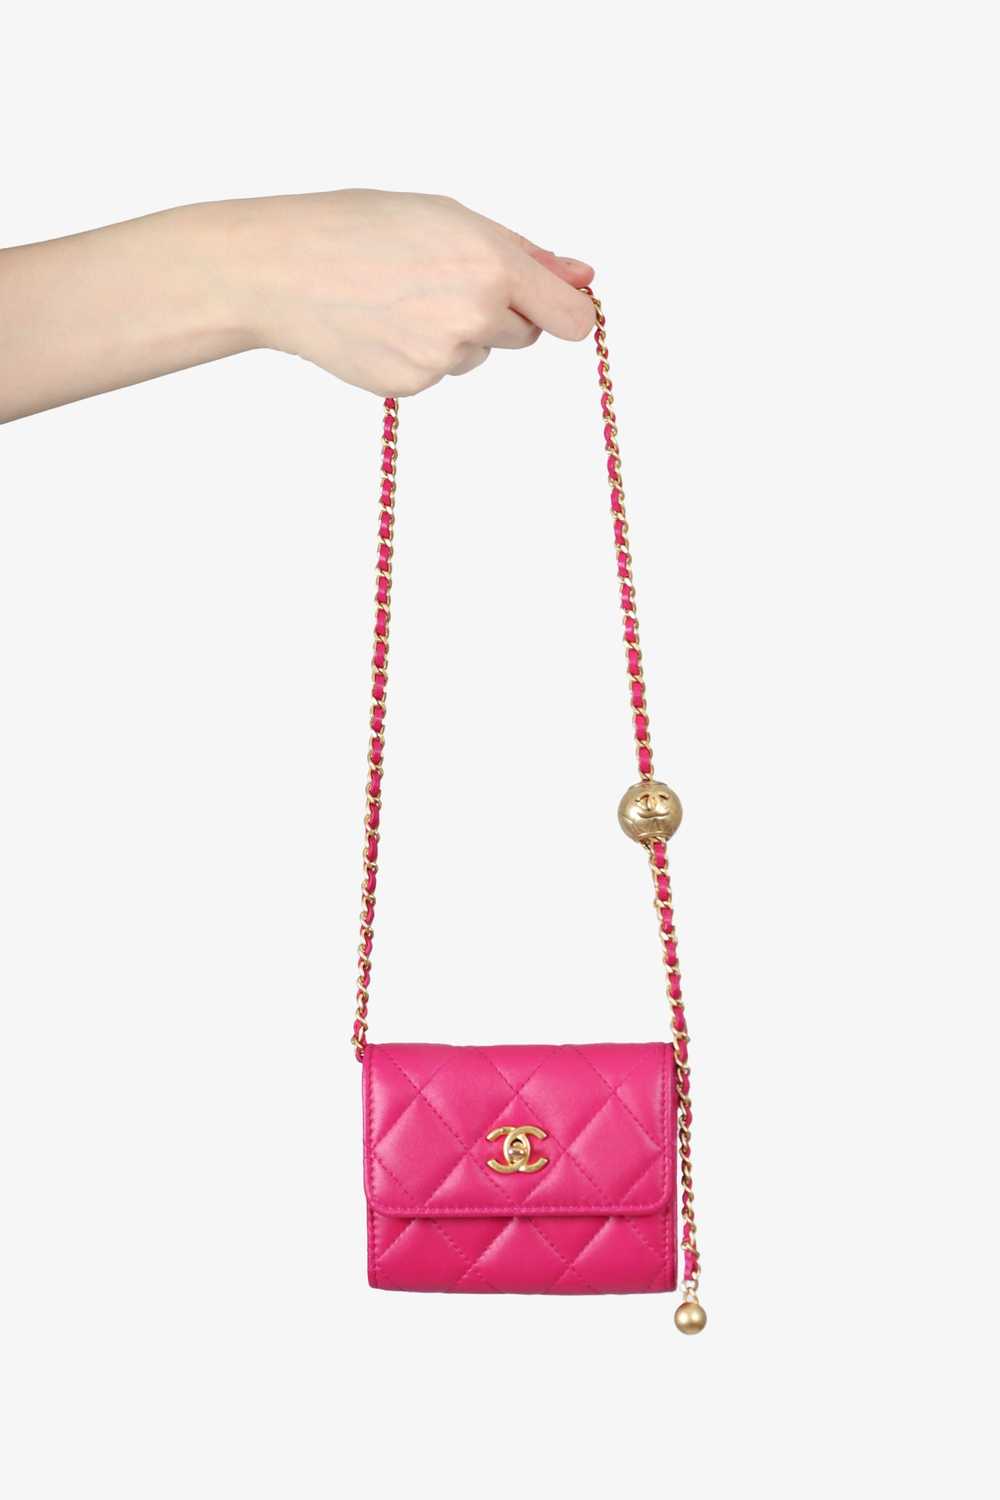 Pre-loved Chanel™ Pink Quilted Leather Pearl Crus… - image 2